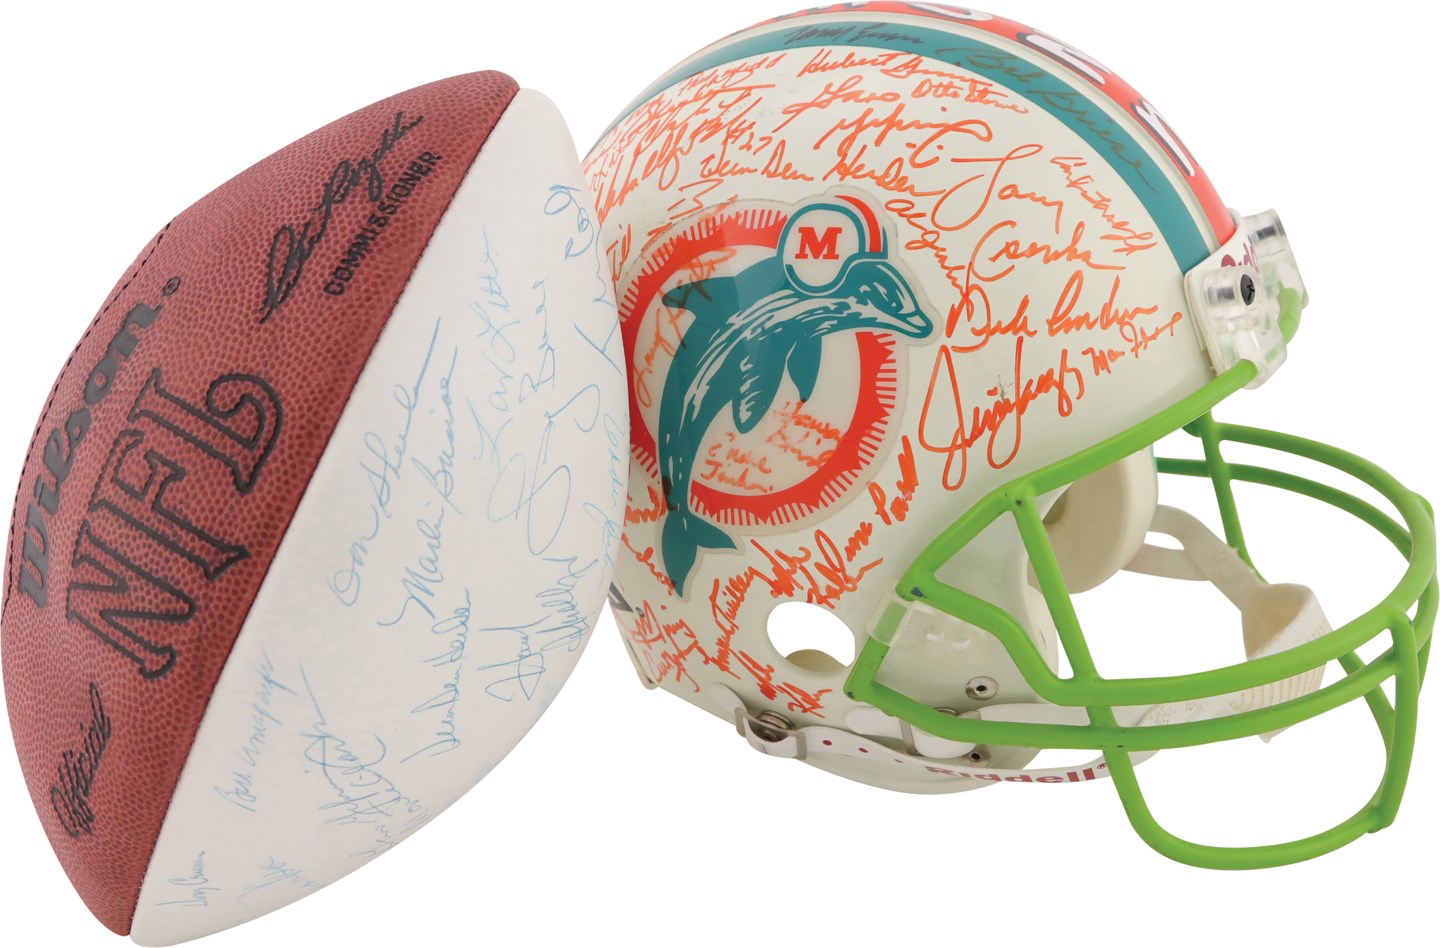 1972 Miami Dolphins Team-Signed Football and Limited Edition Hand Painted Team-Signed Helmet